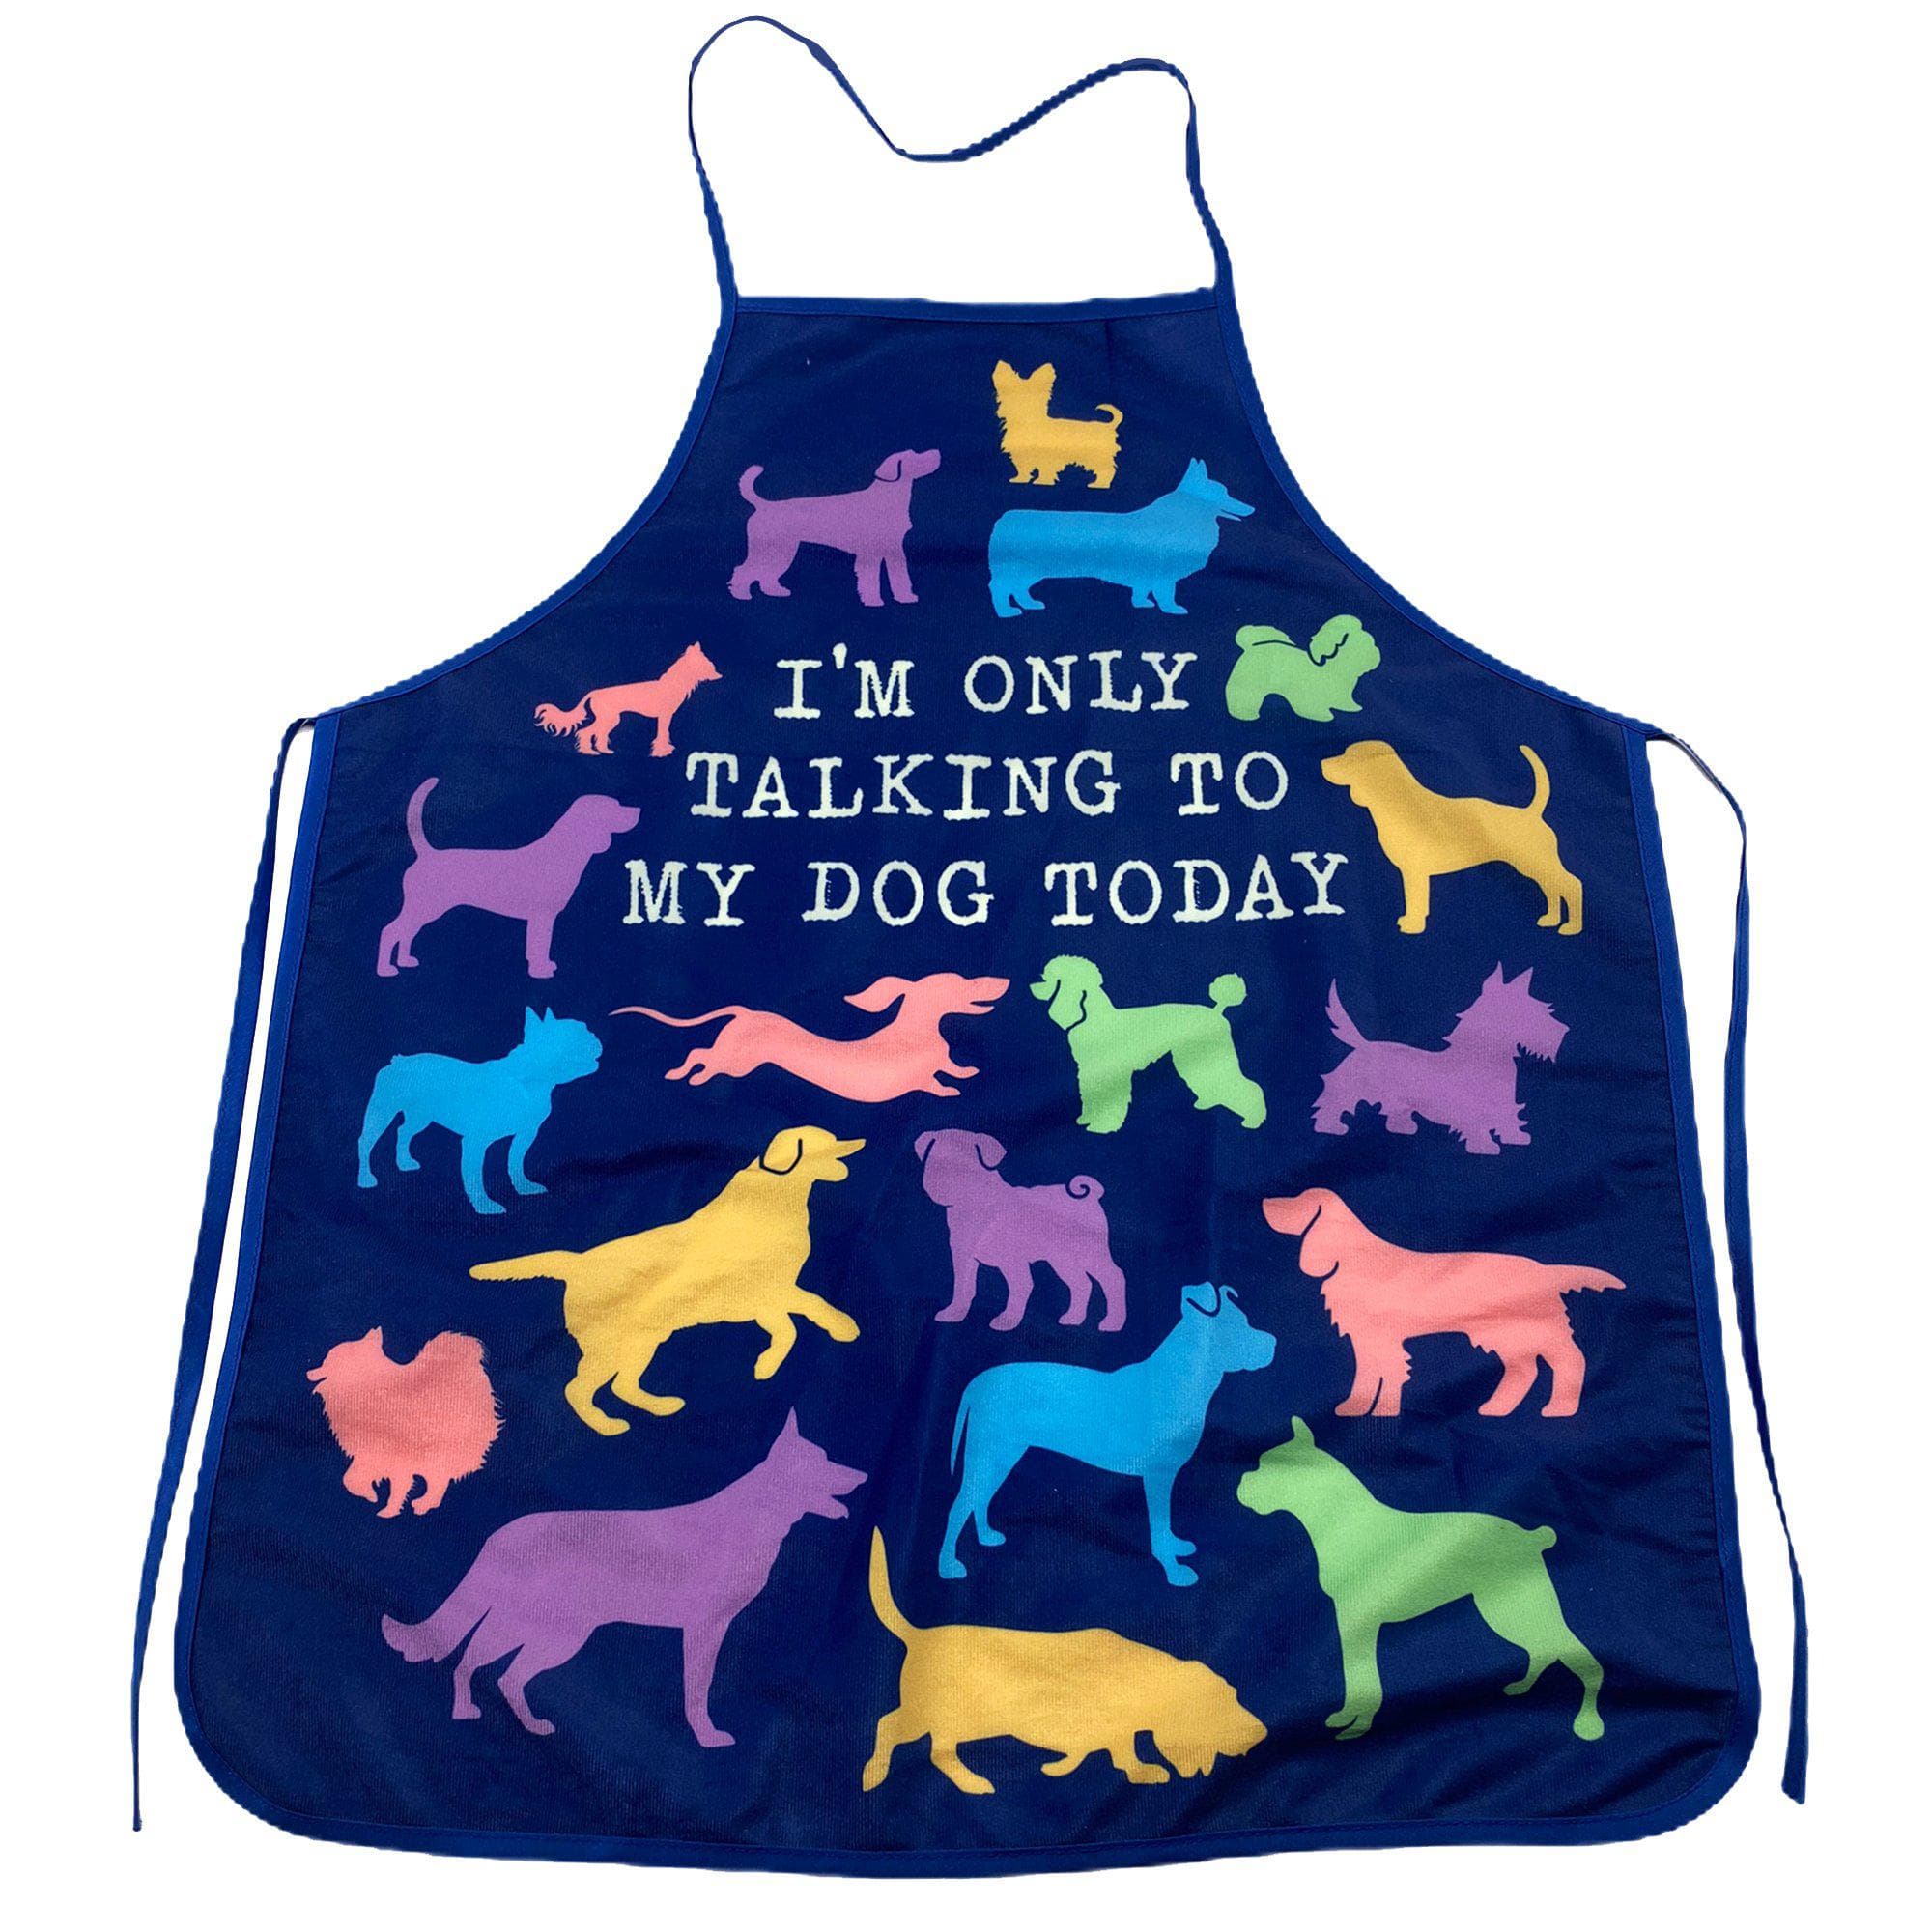 I'm Only Talking To My Dog Today Apron - Crazy Dog T-Shirts